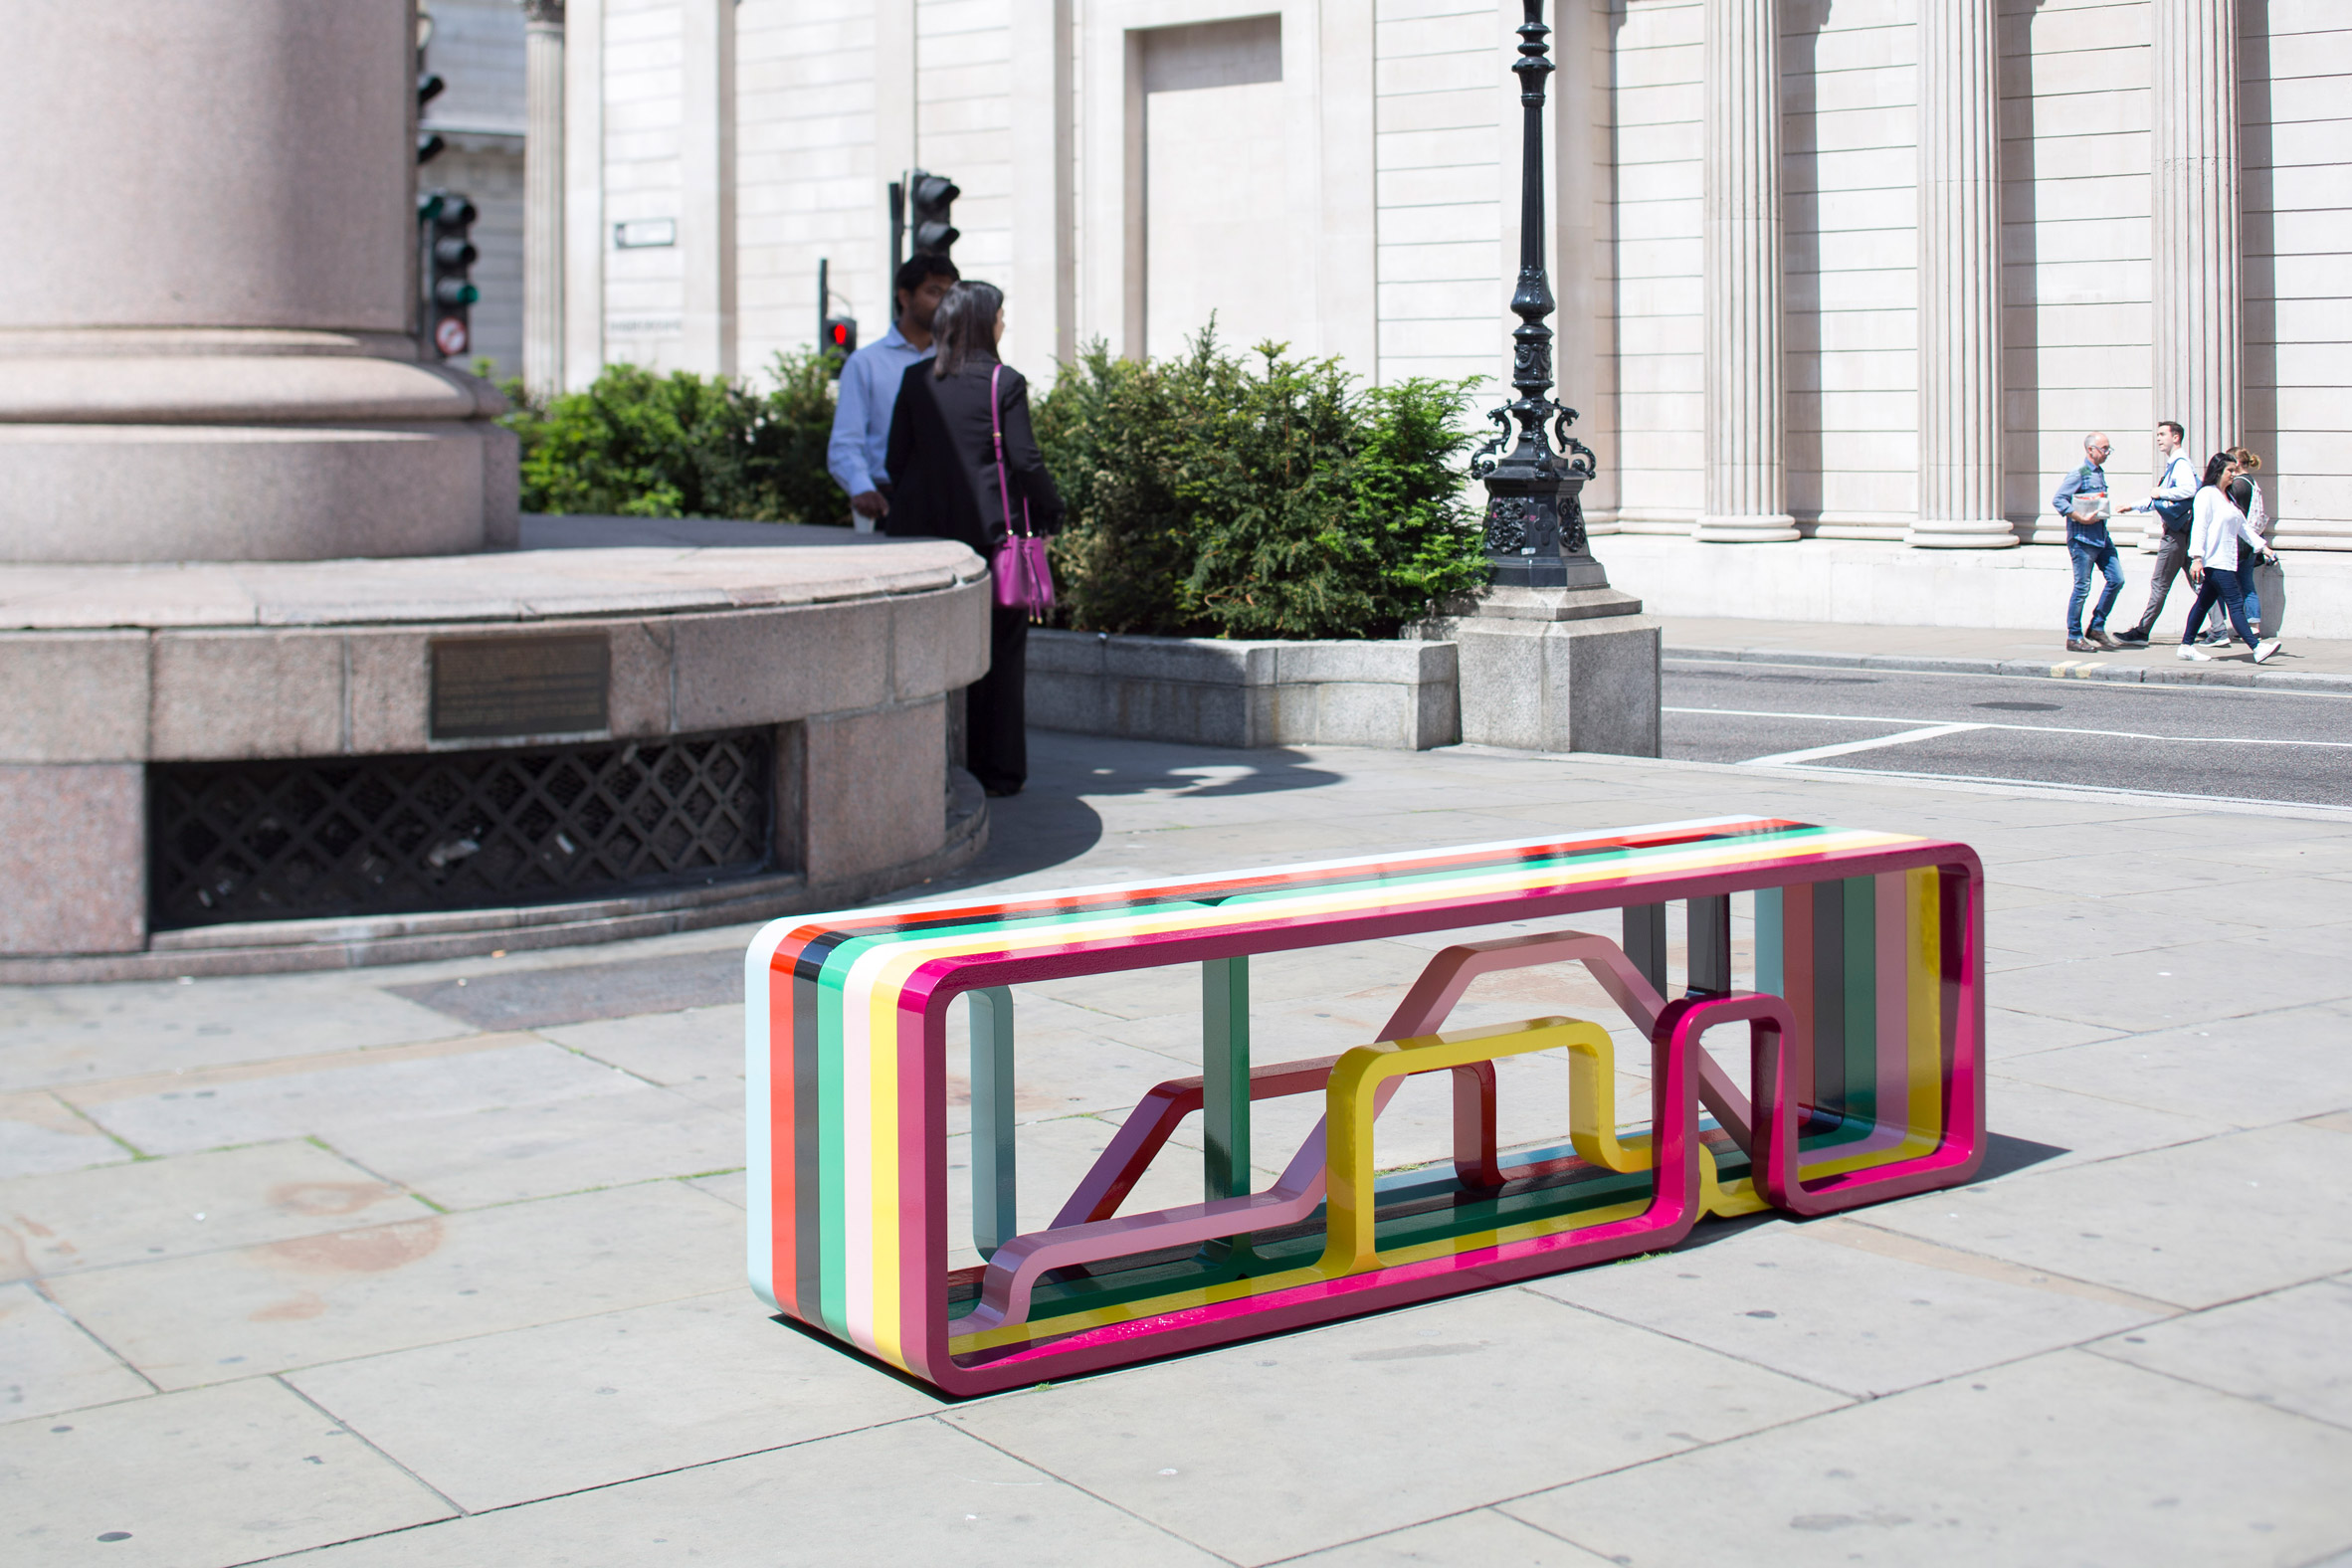 City Benches: Correlated Journeys by Sarah Emily Porter and James Trundle at London Festival of Architecture 